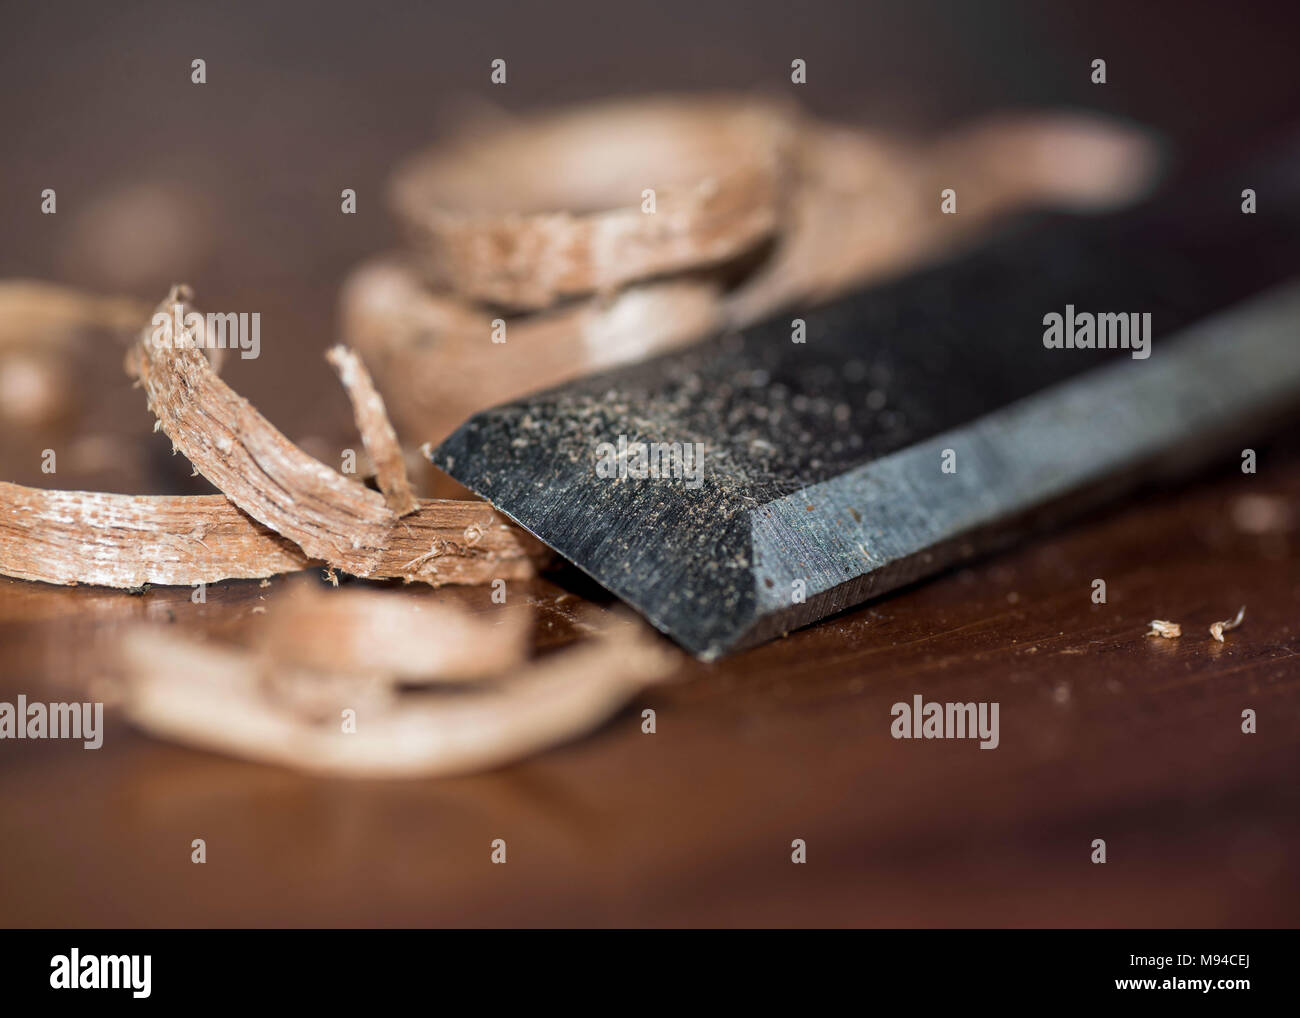 woodworking chisel and wood shavings Stock Photo